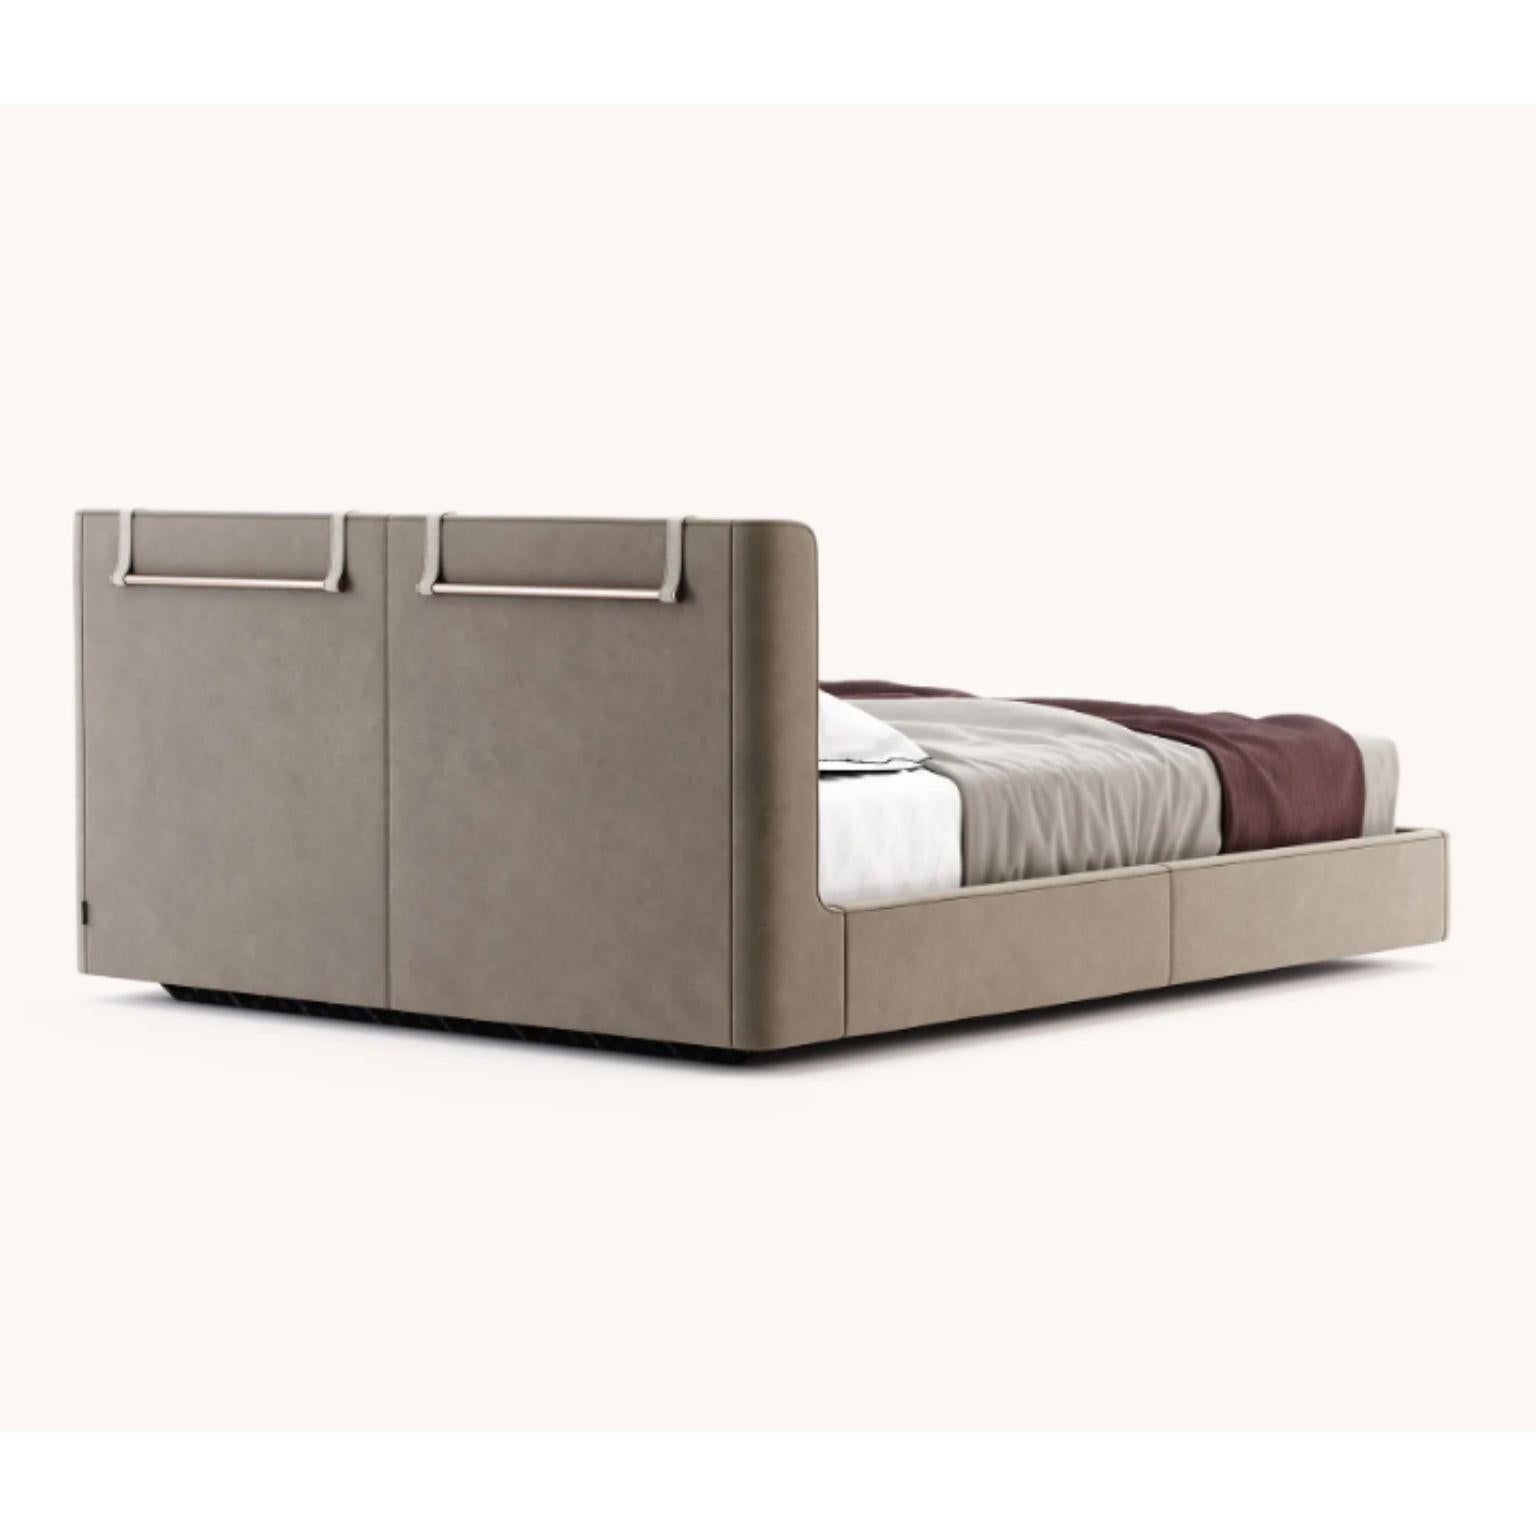 Other King Size Kelsi Bed by Domkapa